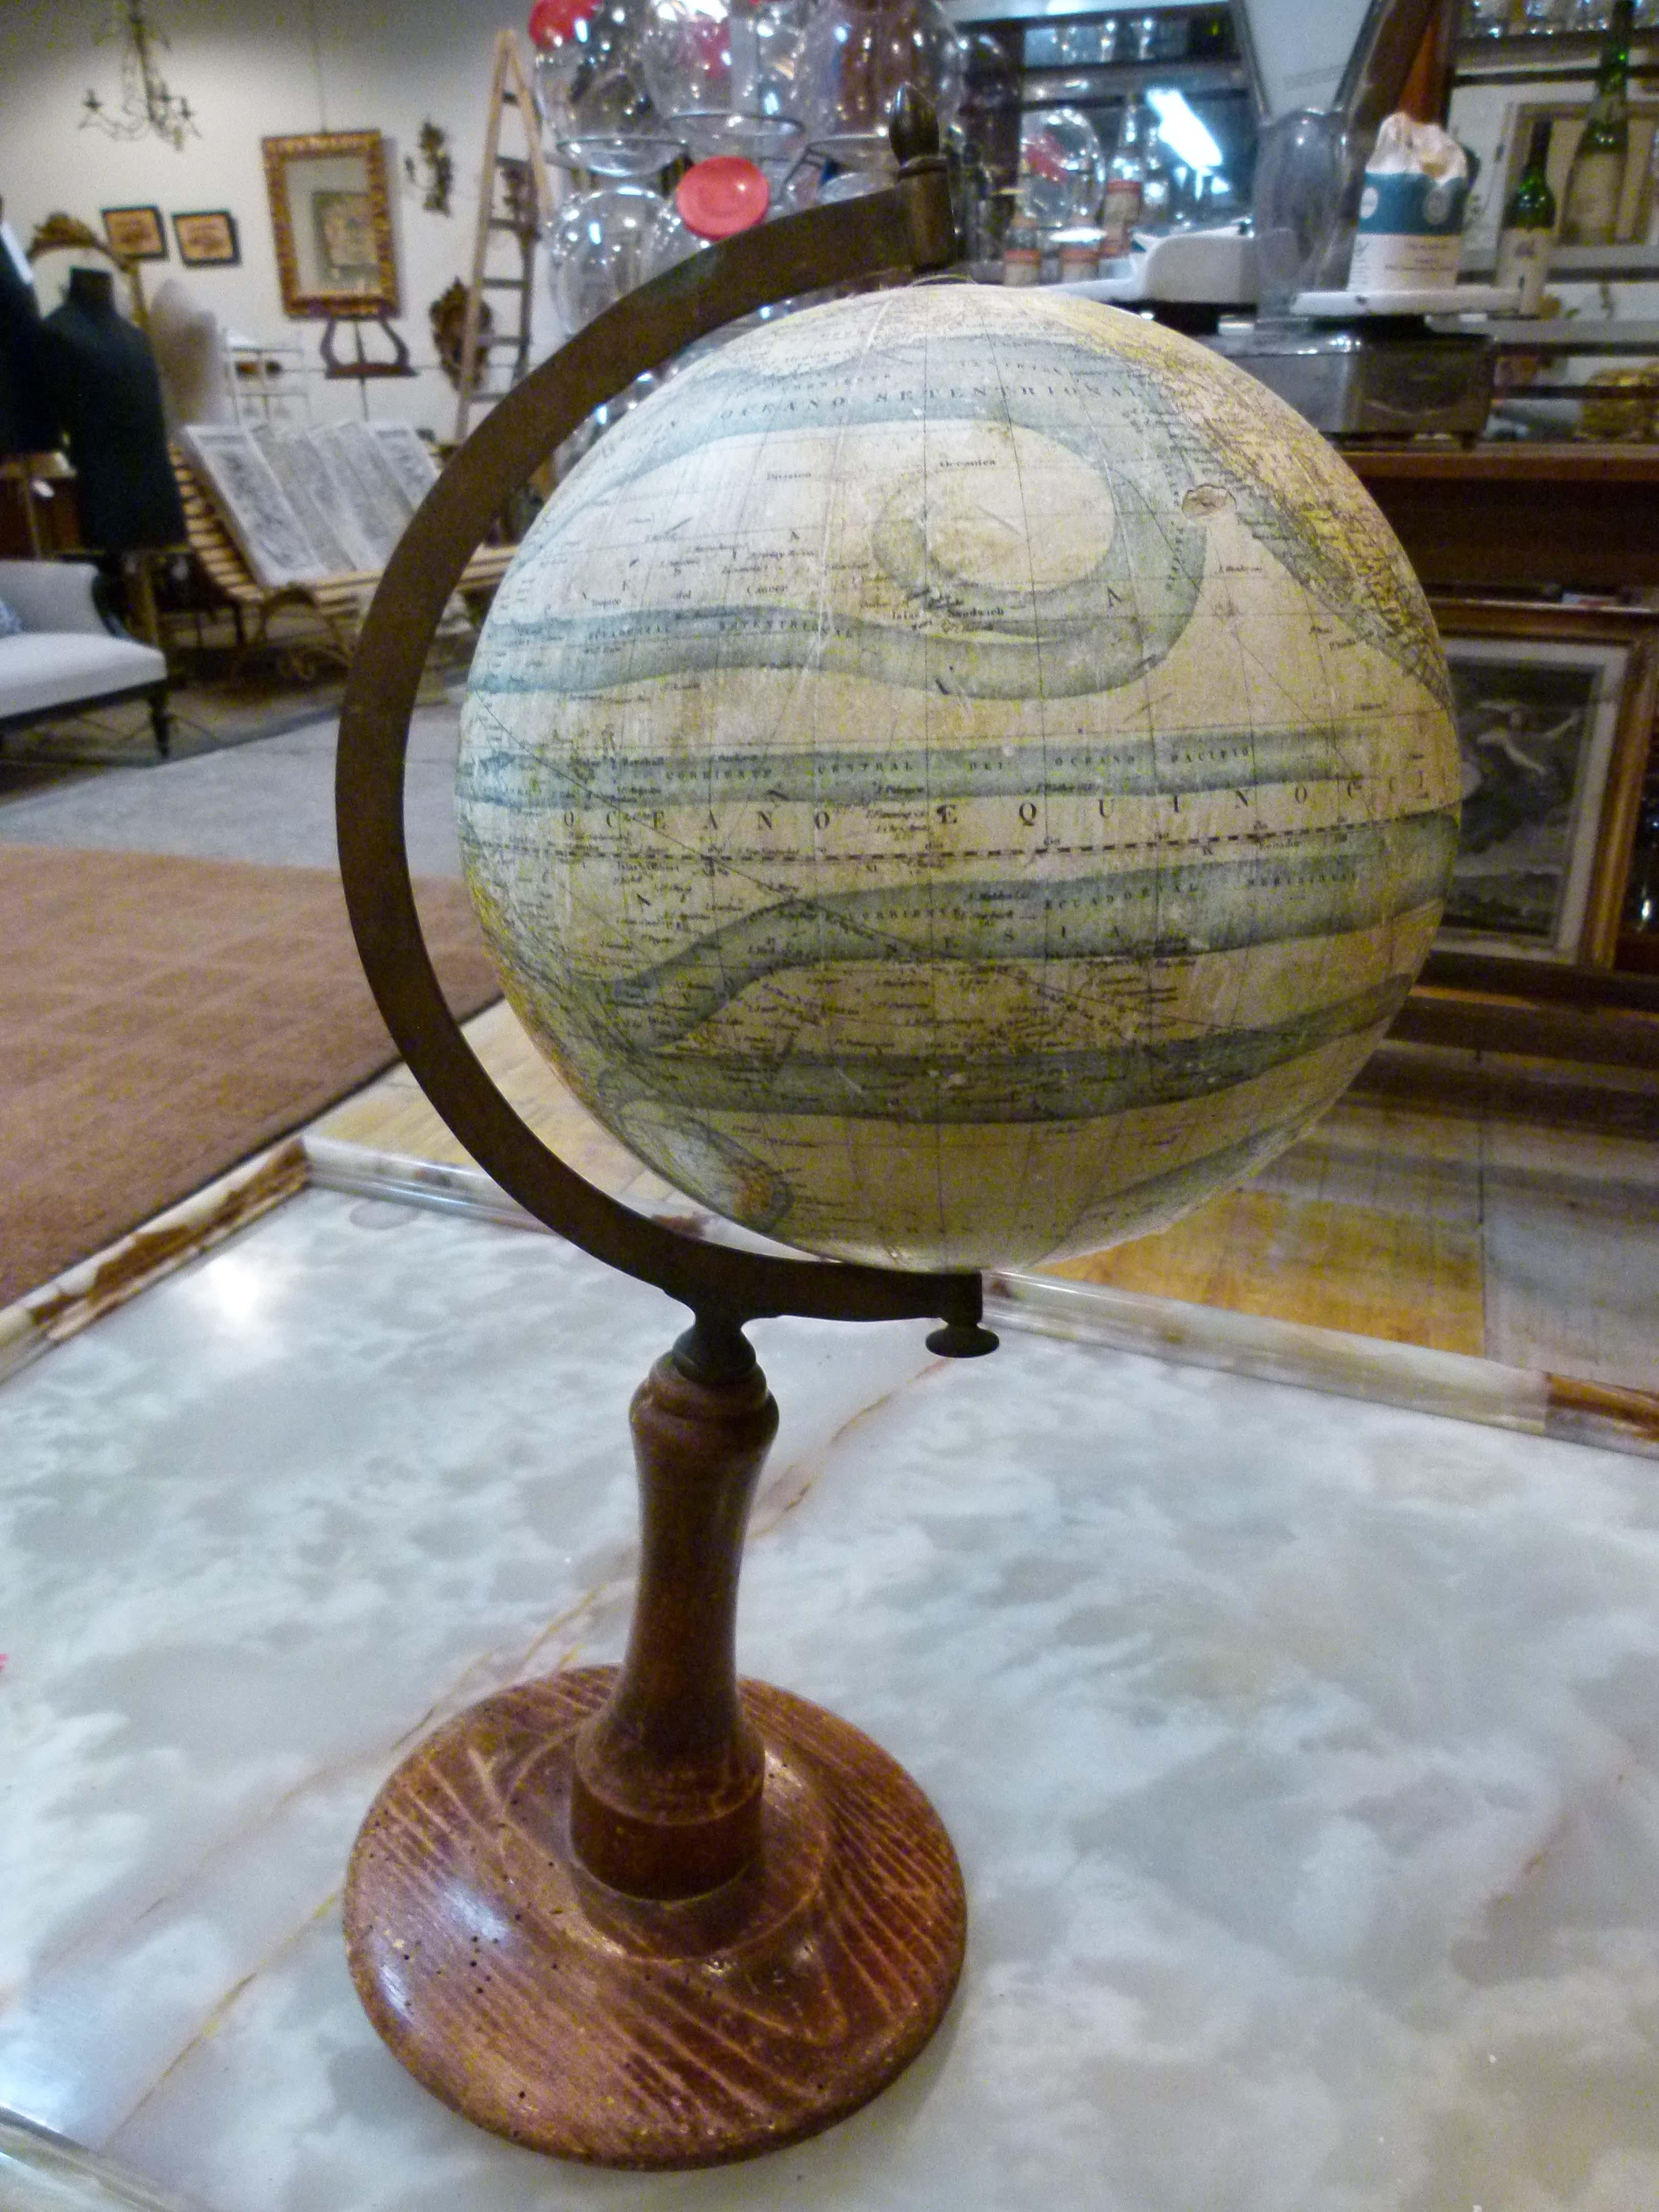 Early 20th century earth globe.
Wooden base and Globus made of plaster and paper.
As you can see in one photo the paper has been damaged in this one place. The rest is in perfect conditions.